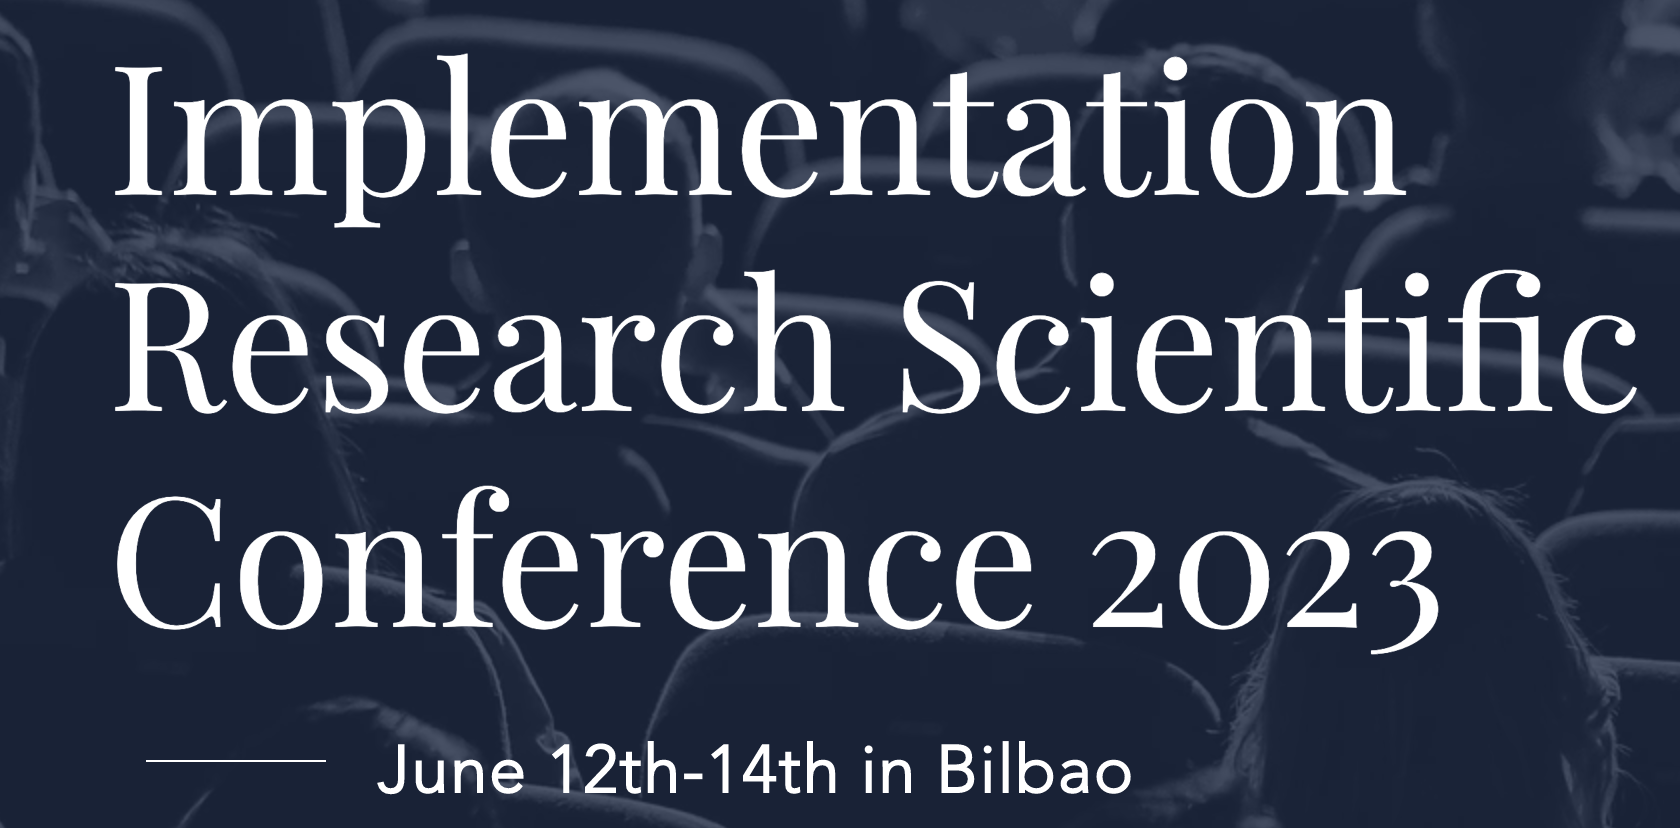 Implementation Research Scientific Conference 2023 event banner